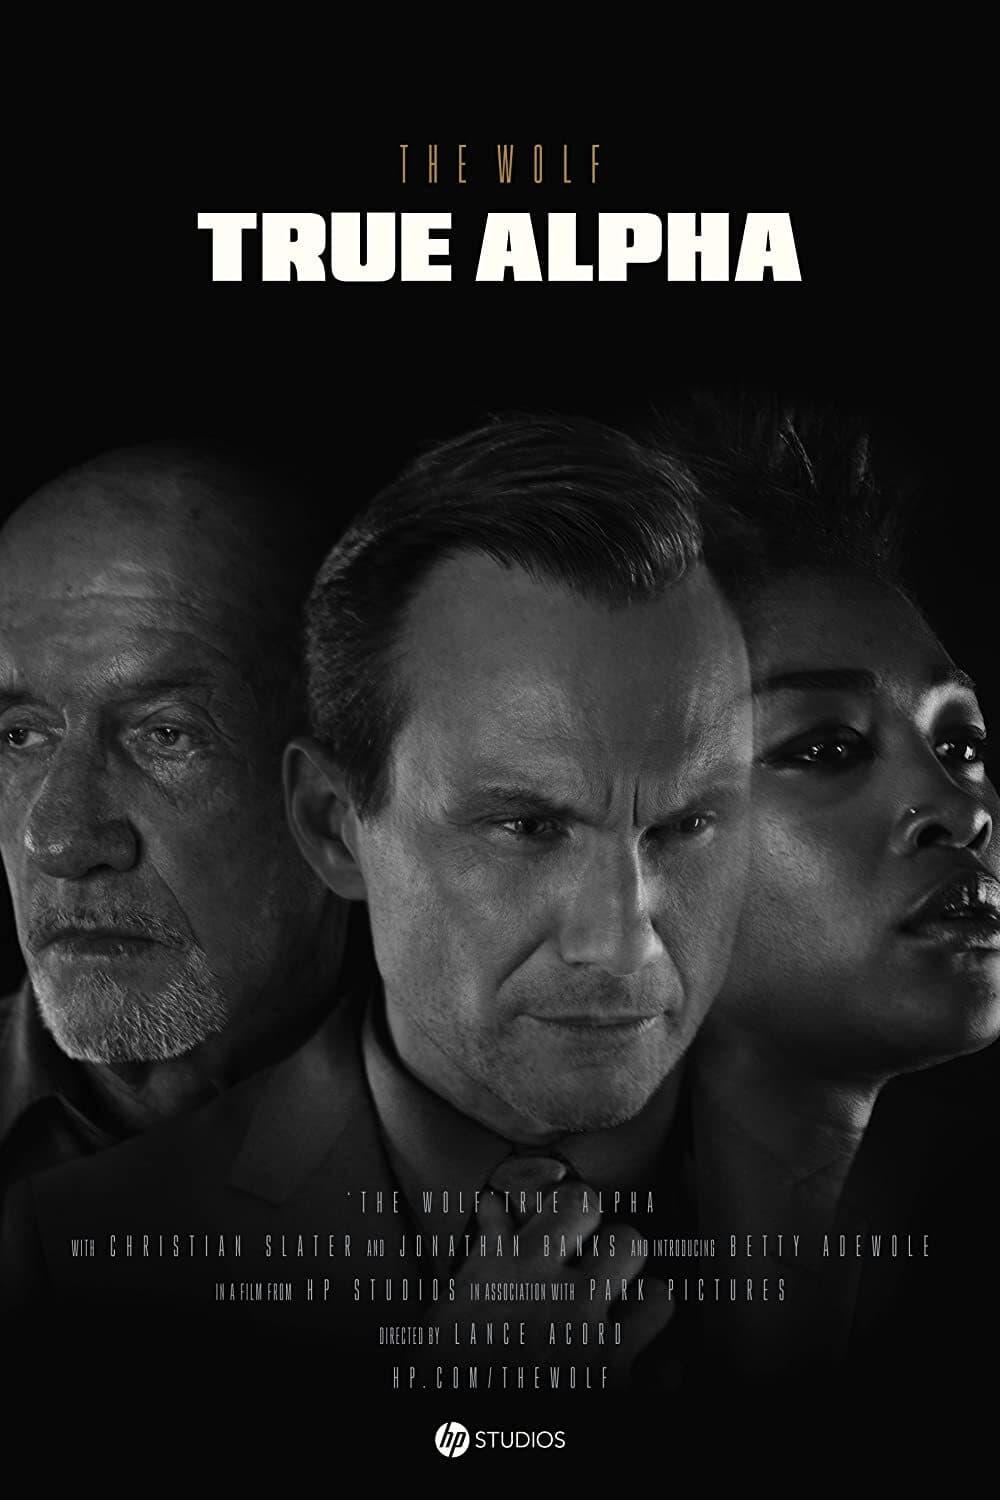 The Wolf: True Alpha poster